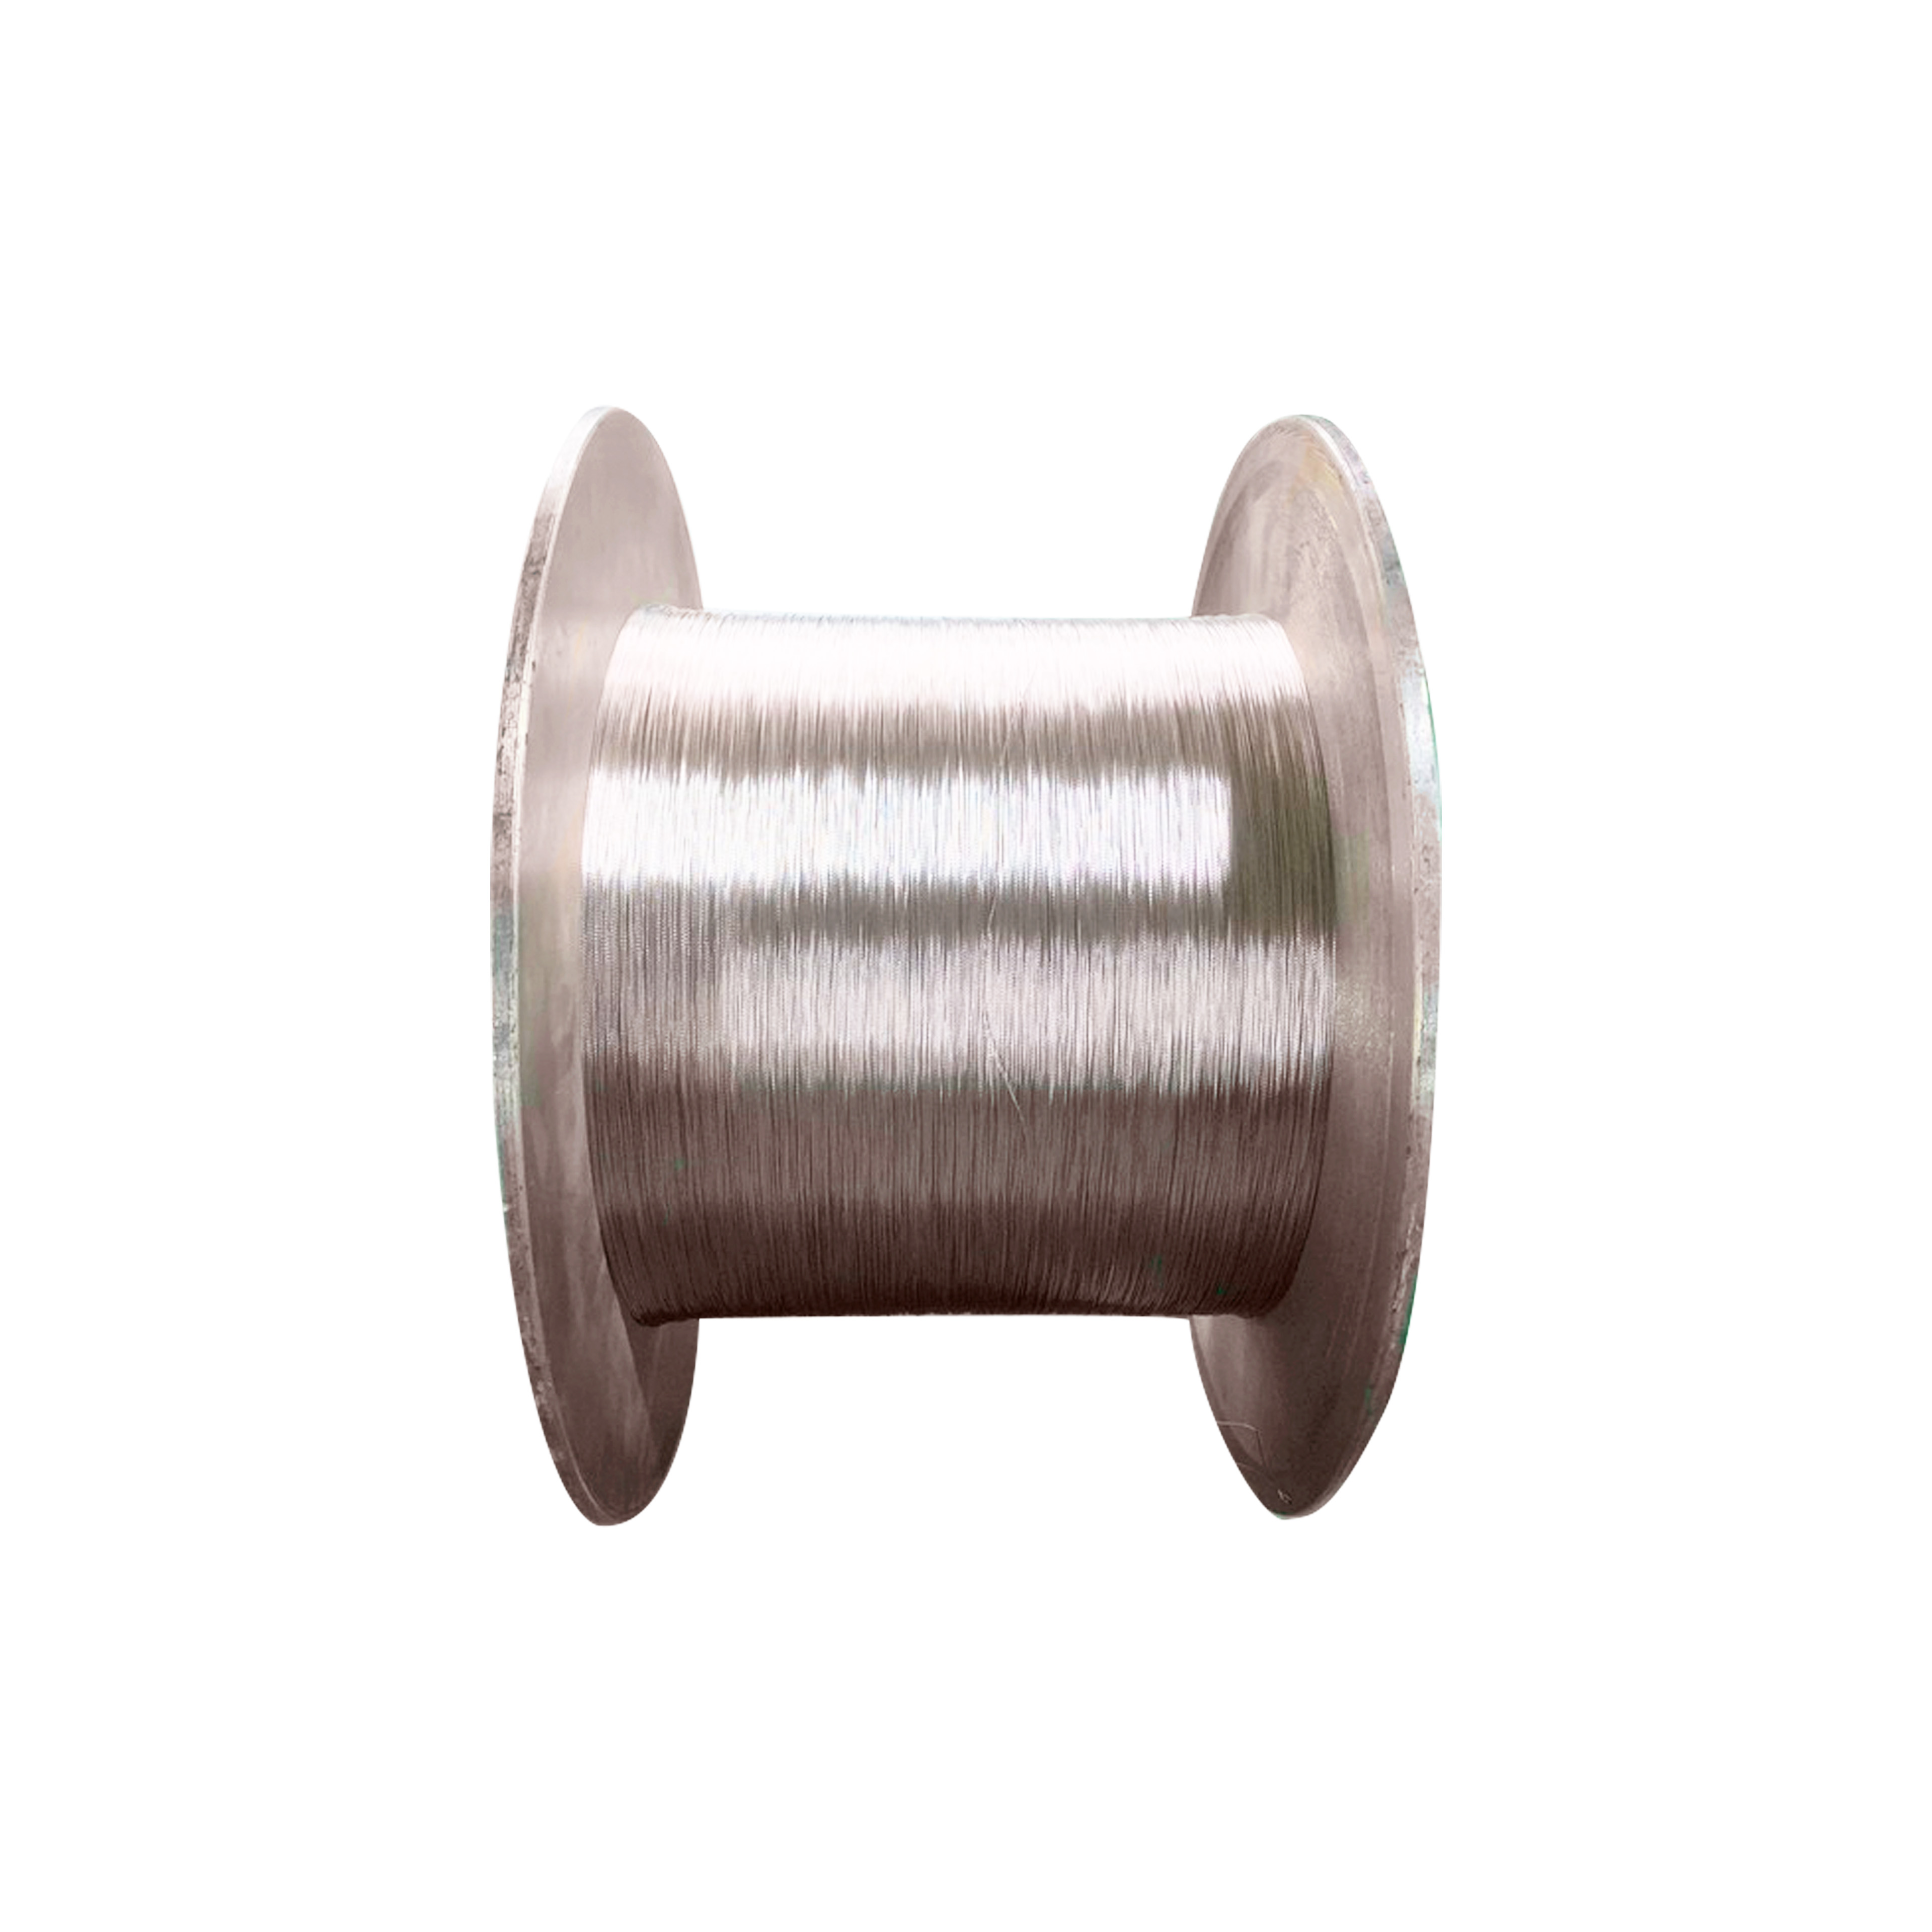 2019 Latest Design 14g Silver Wire -
 High Conductivity Silver Plated Copper Wire For Transformer – Tianchuang